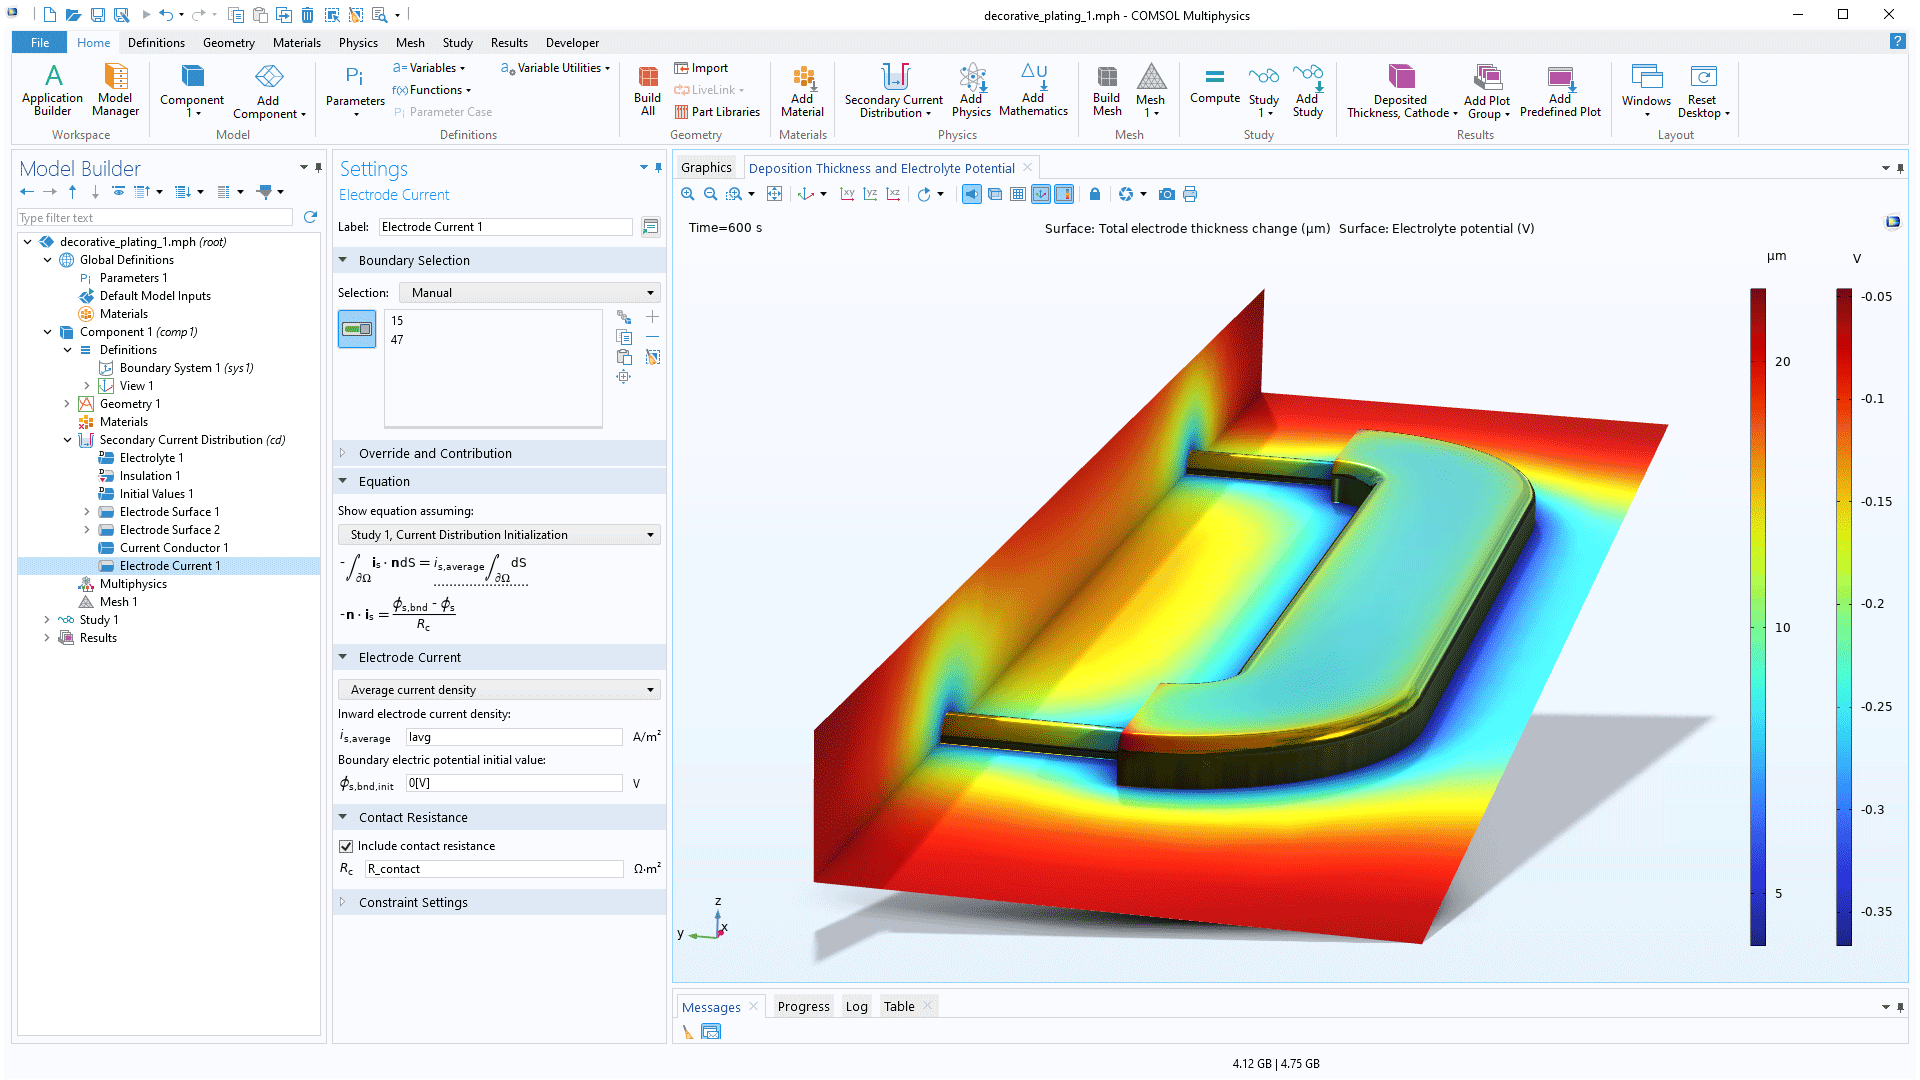 The COMSOL Multiphysics UI showing the Model Builder with the Electrode Current node highlighted, the corresponding Settings window, and a decorative plating model in the Graphics window.